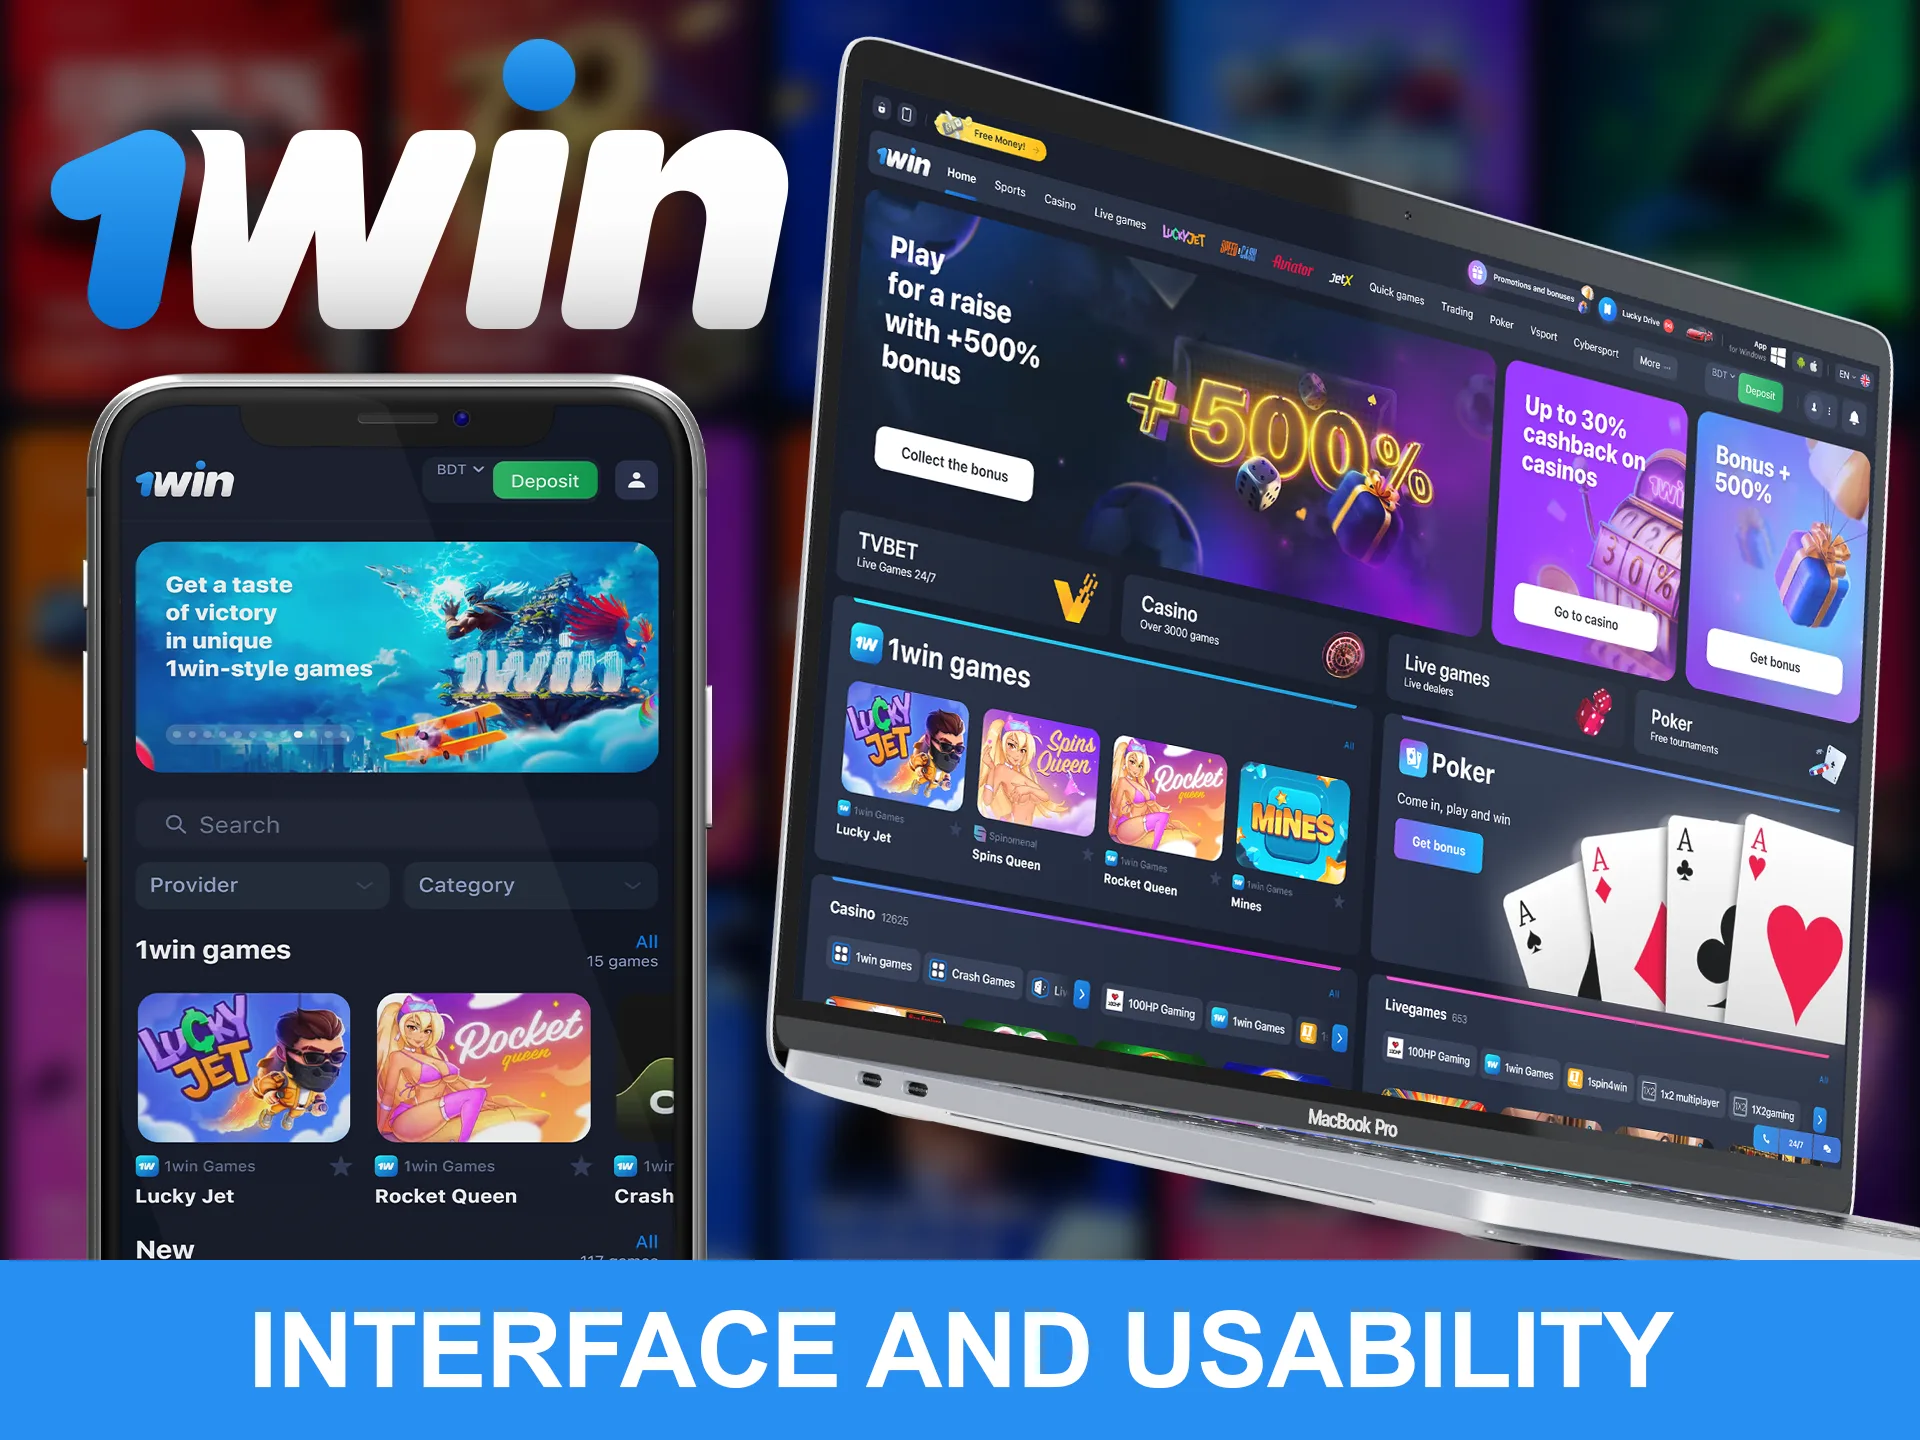 1win has a user-friendly and easy-to-understand interface.